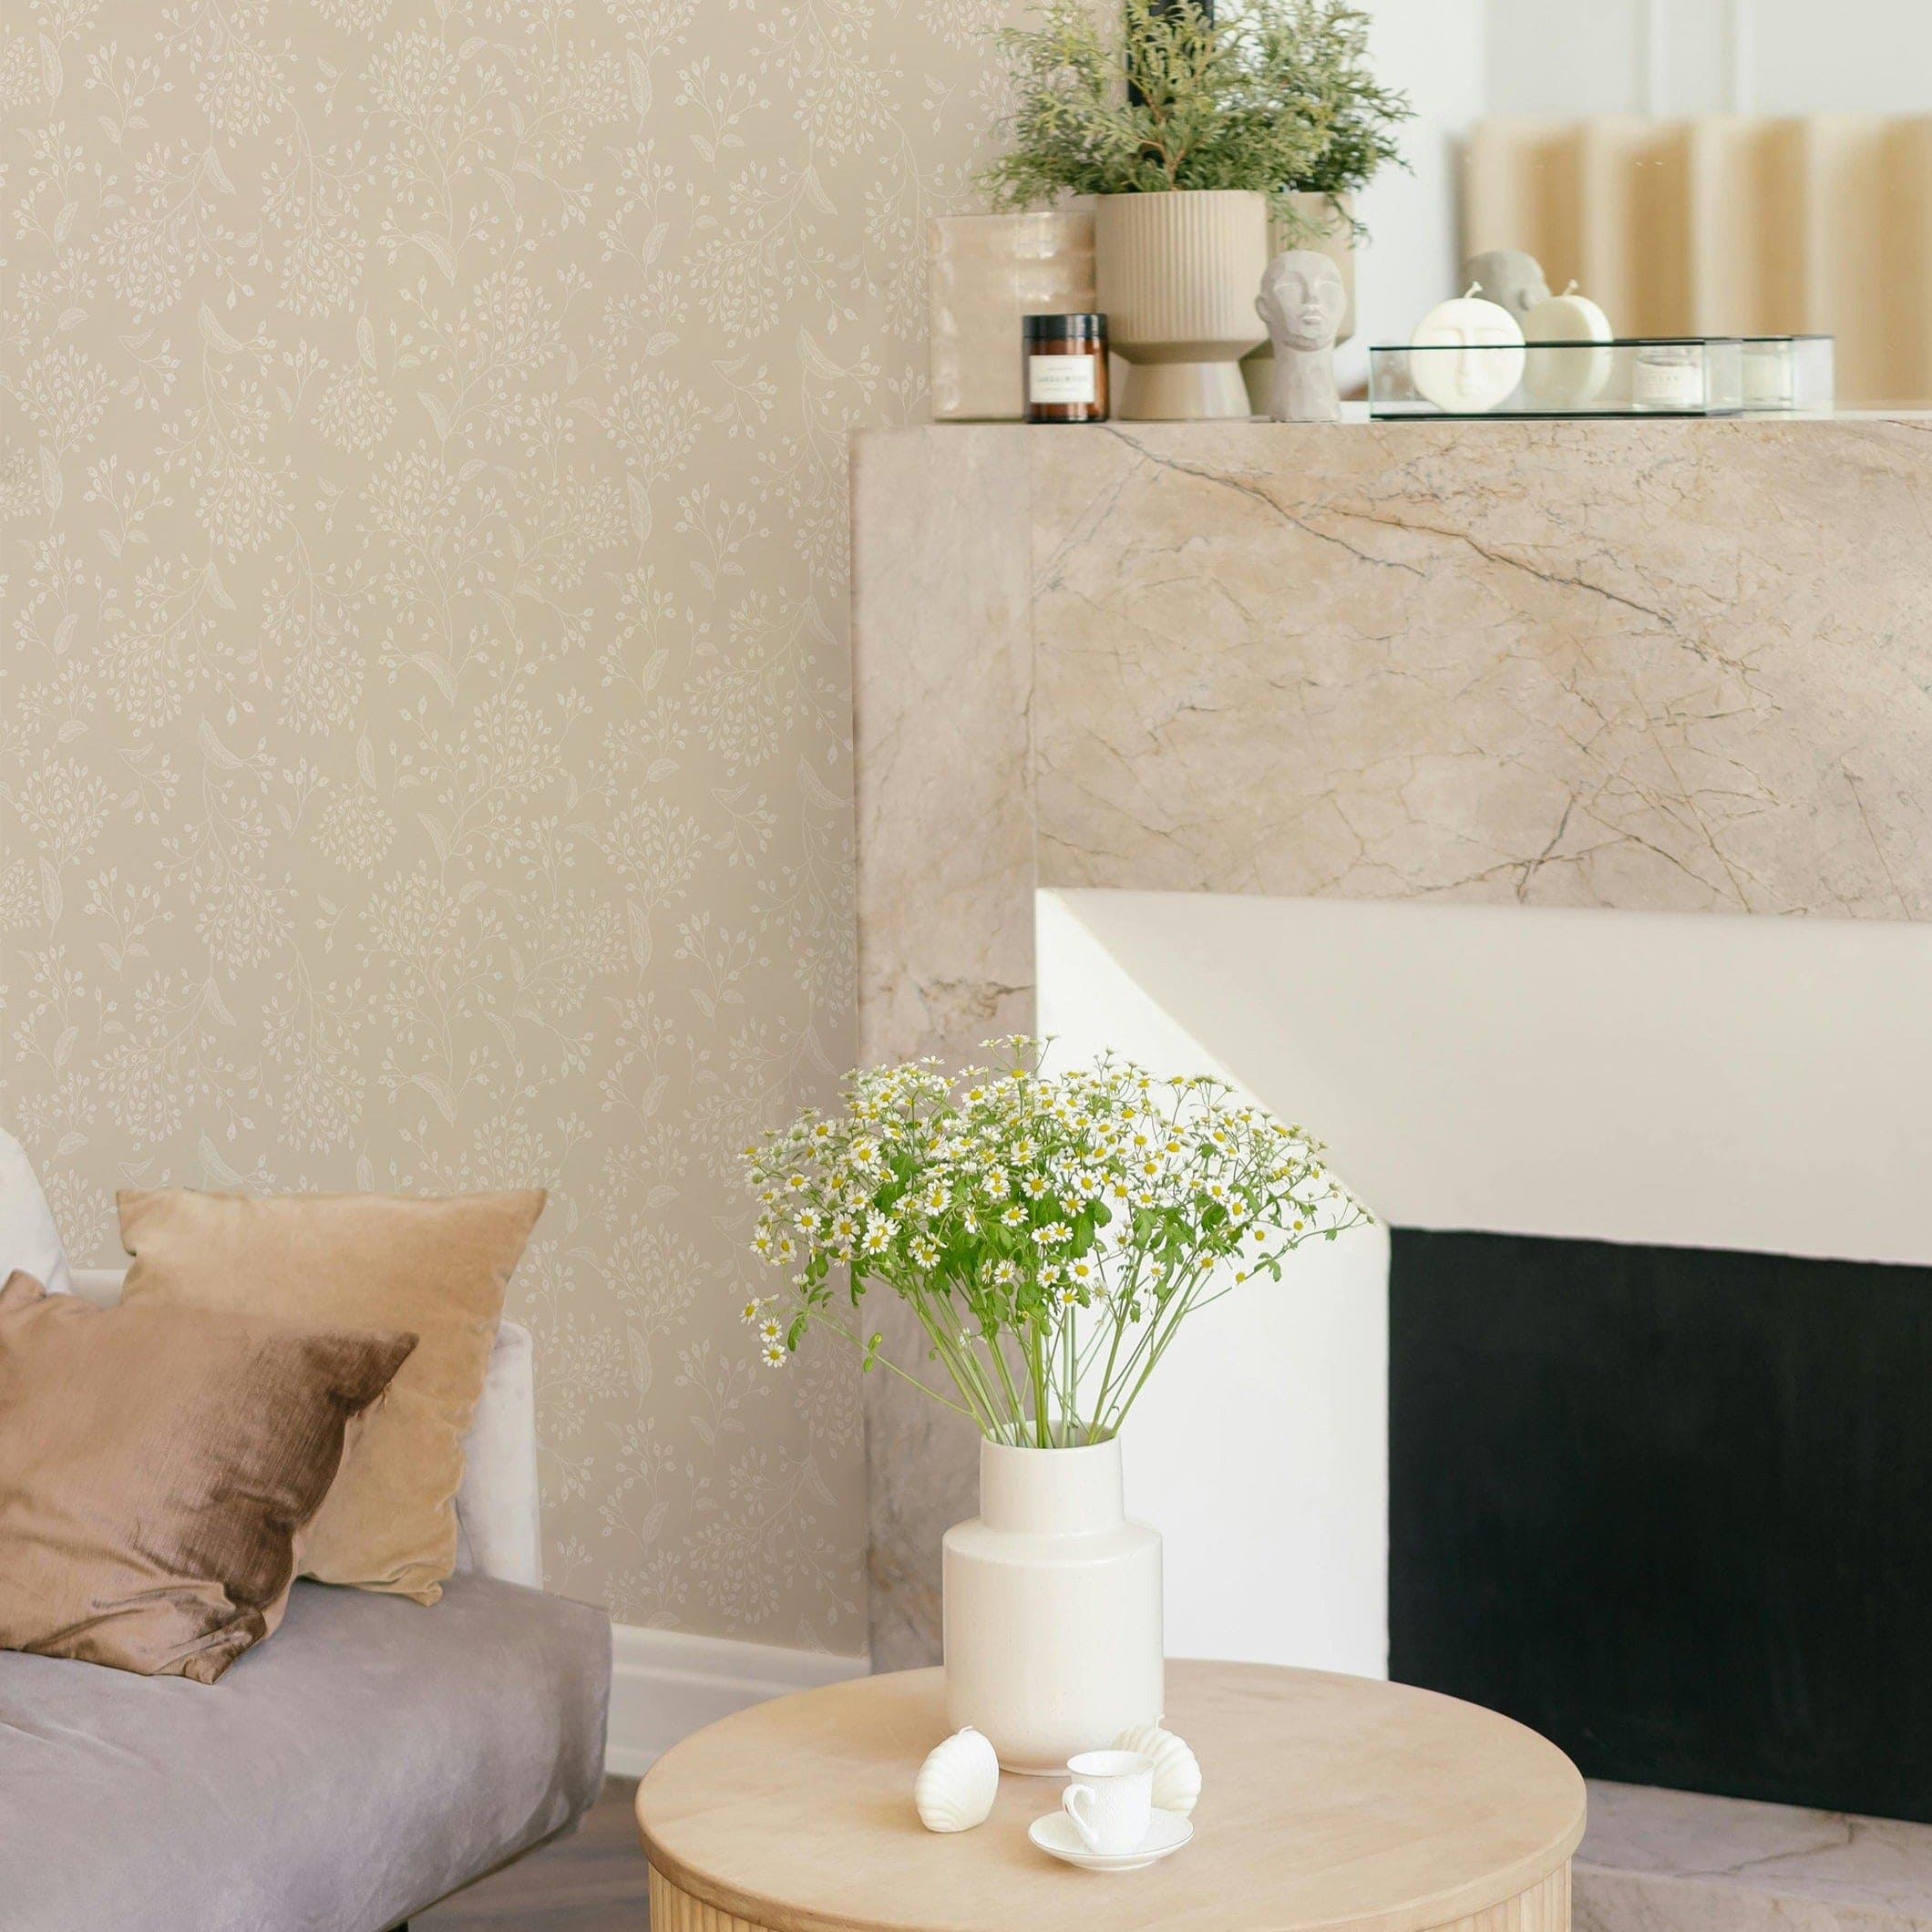 A modern living space accentuated with the Botanical Whisper Wallpaper. This wallpaper has a beige background adorned with subtle, white floral and botanical motifs, providing a soft and inviting backdrop to a contemporary room with a plush sofa, marble fireplace, and a small wooden coffee table with a vase of white flowers